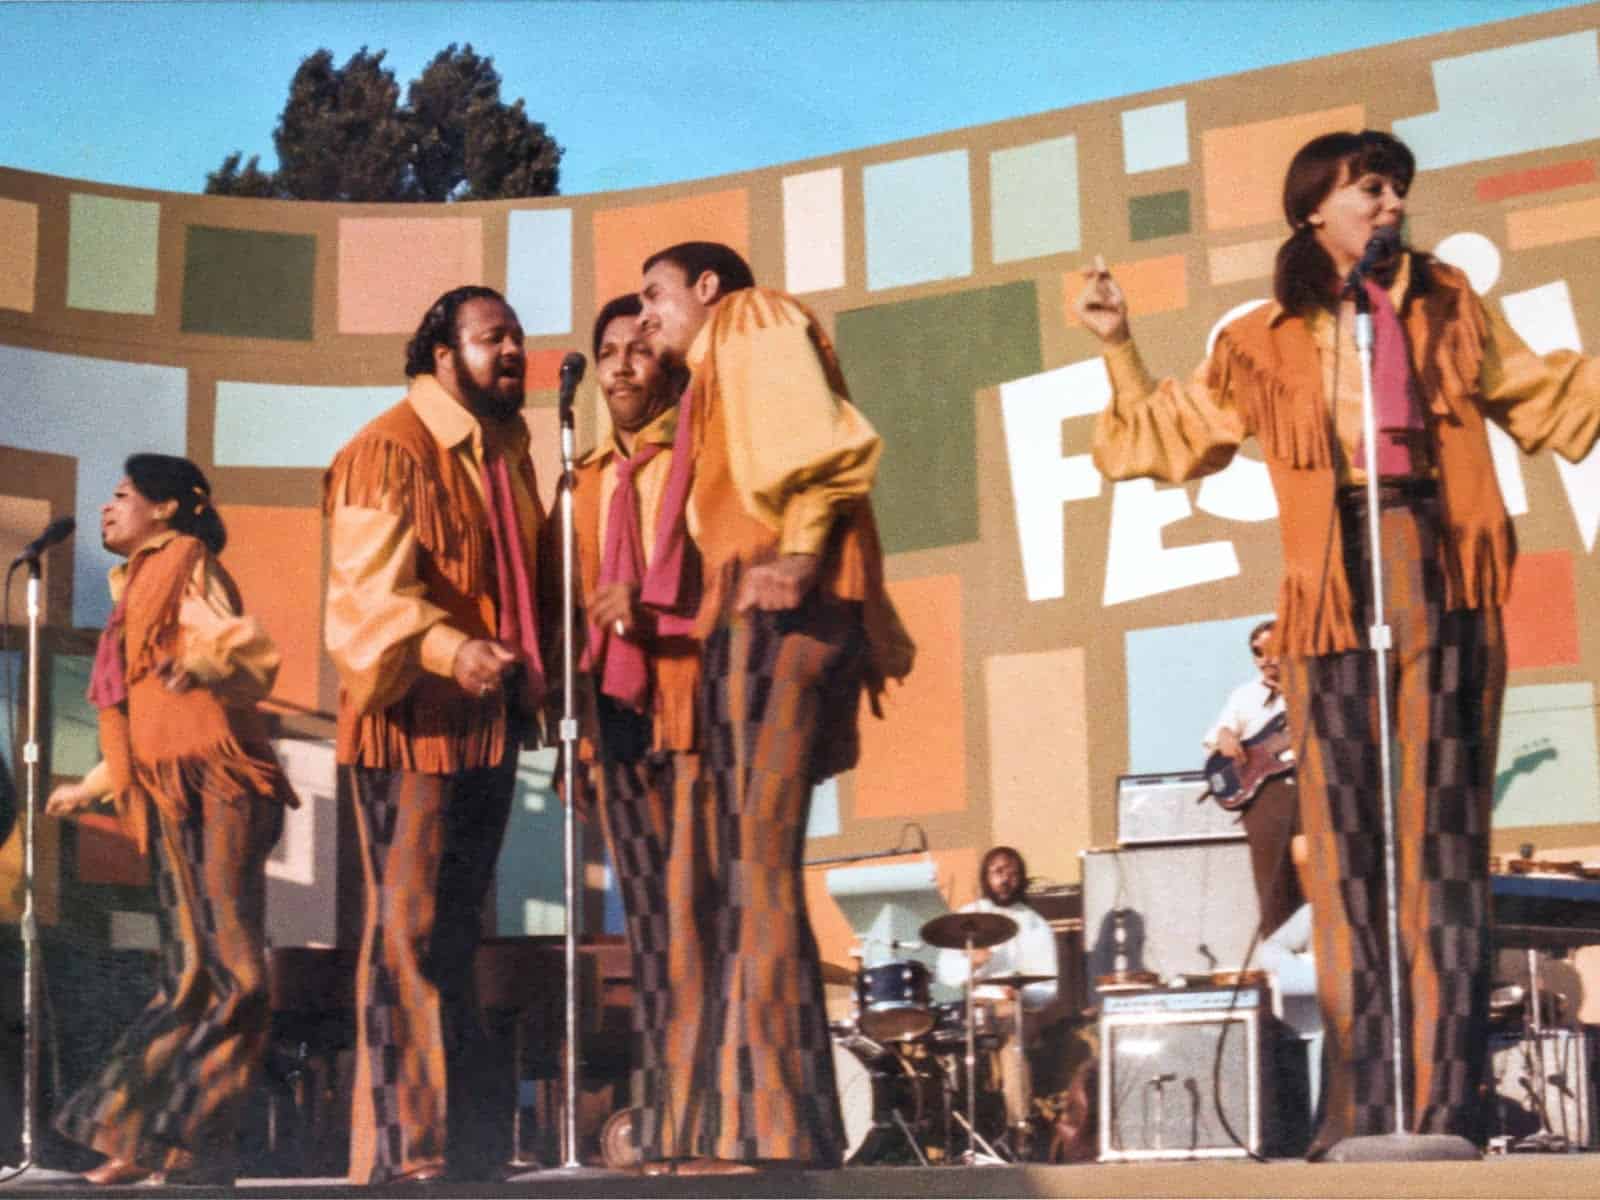 5th Dimension performing on stage in 1969 in this image from Onyx Collective.